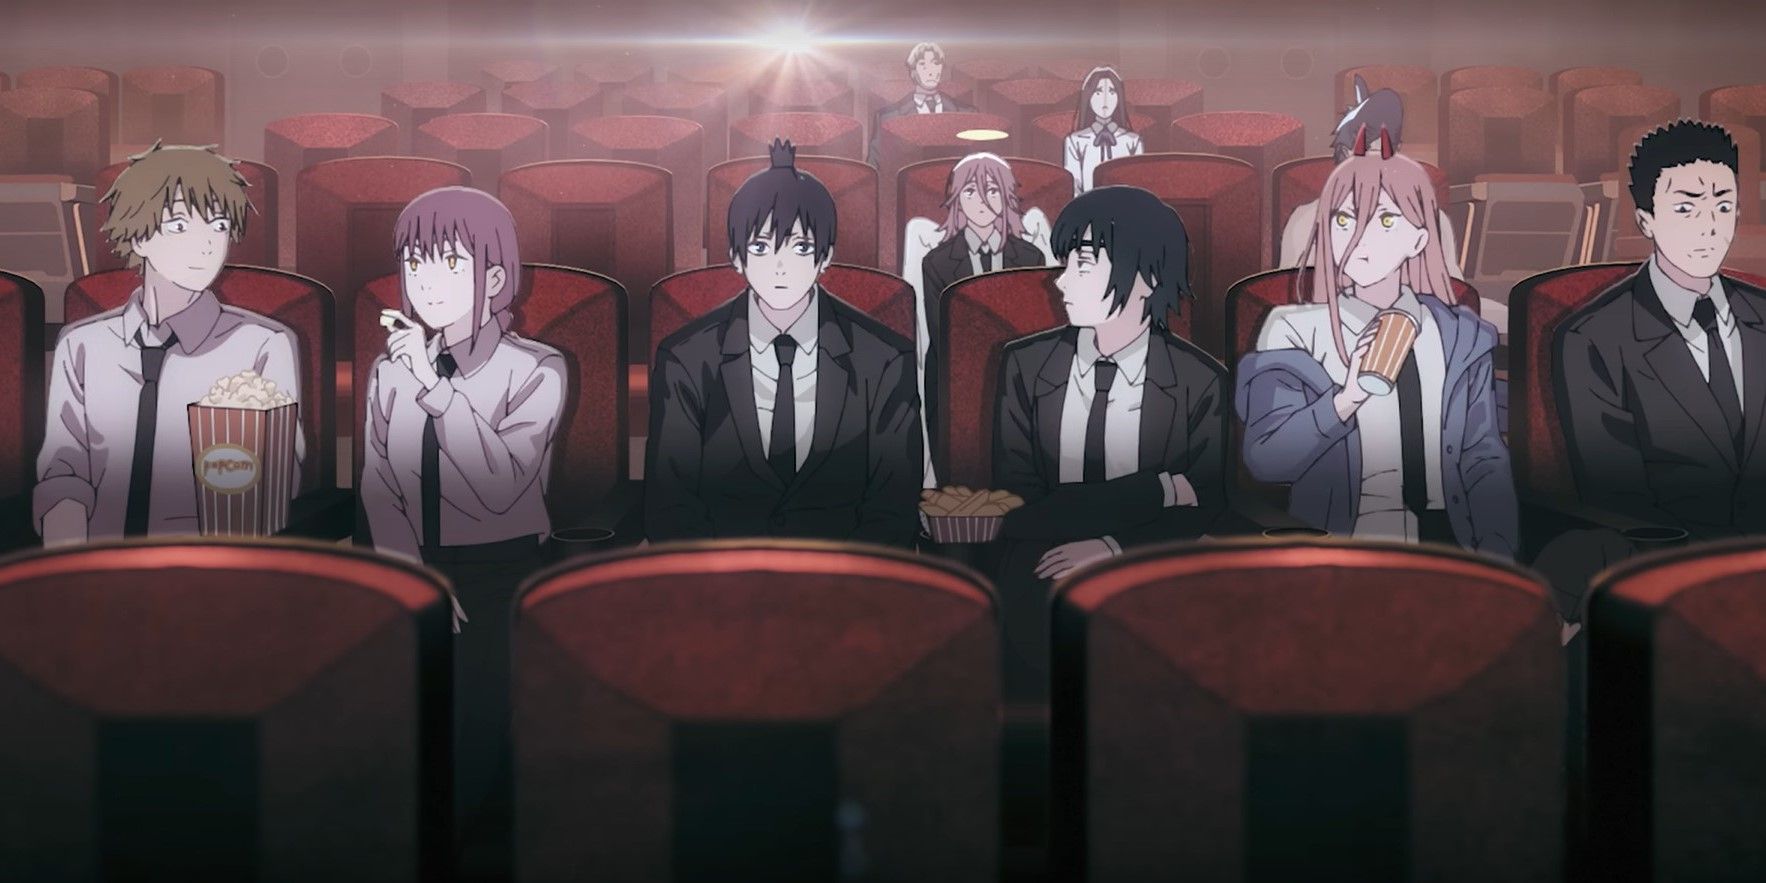 Denji and friends watch a movie in the theater during the opening credits of Chainsaw Man.